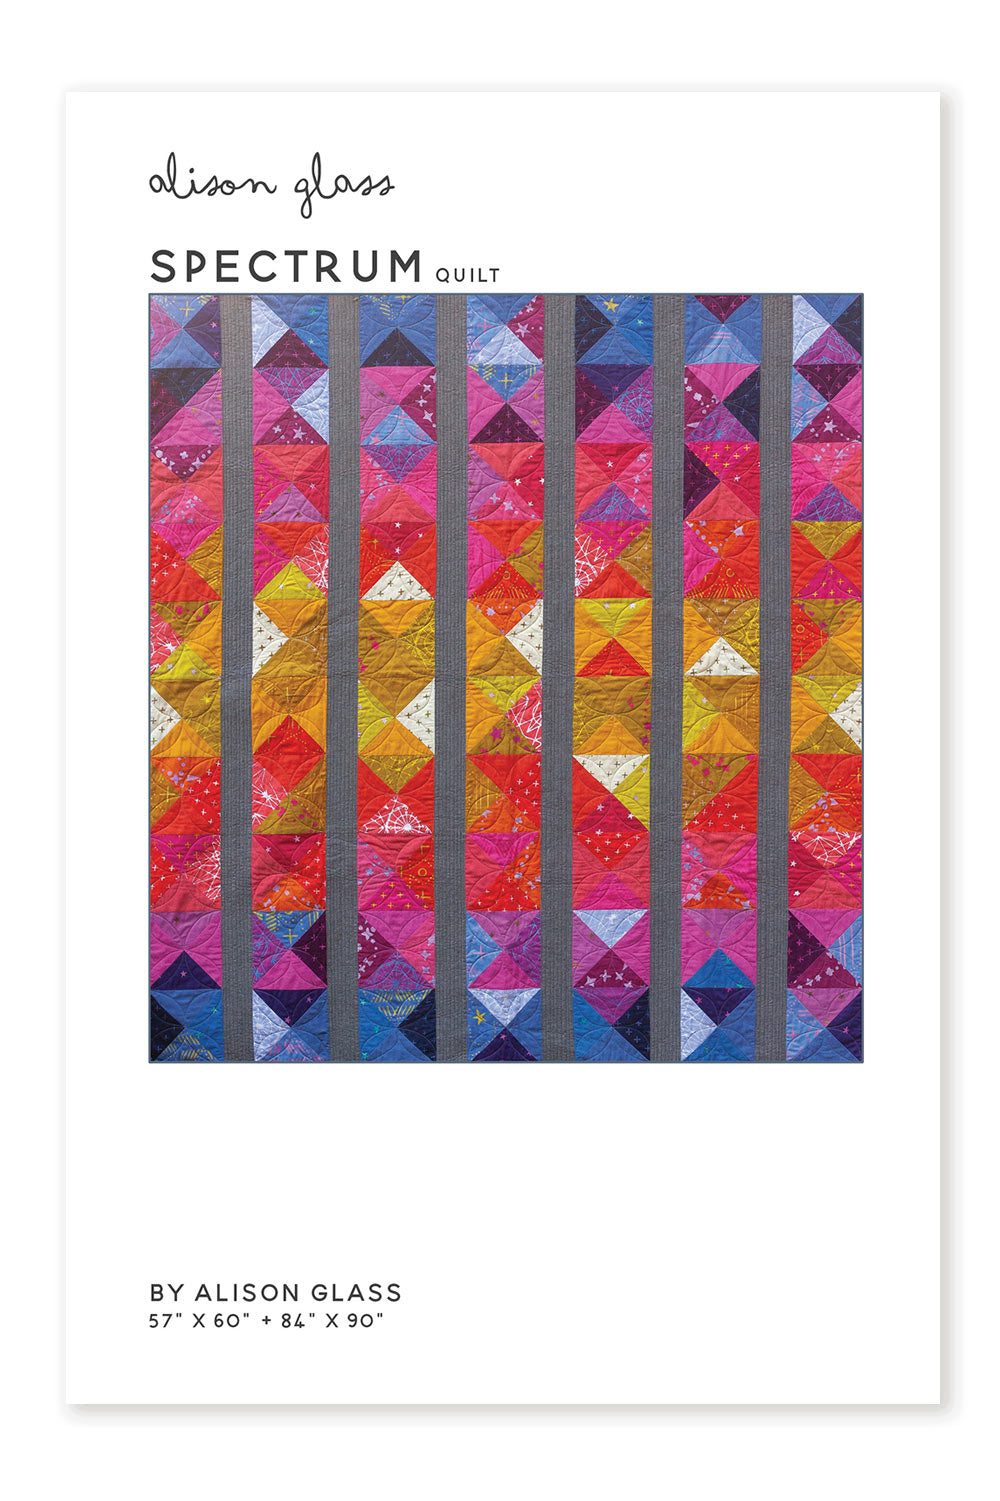 Spectrum by Glass, Alison - Printed Pattern